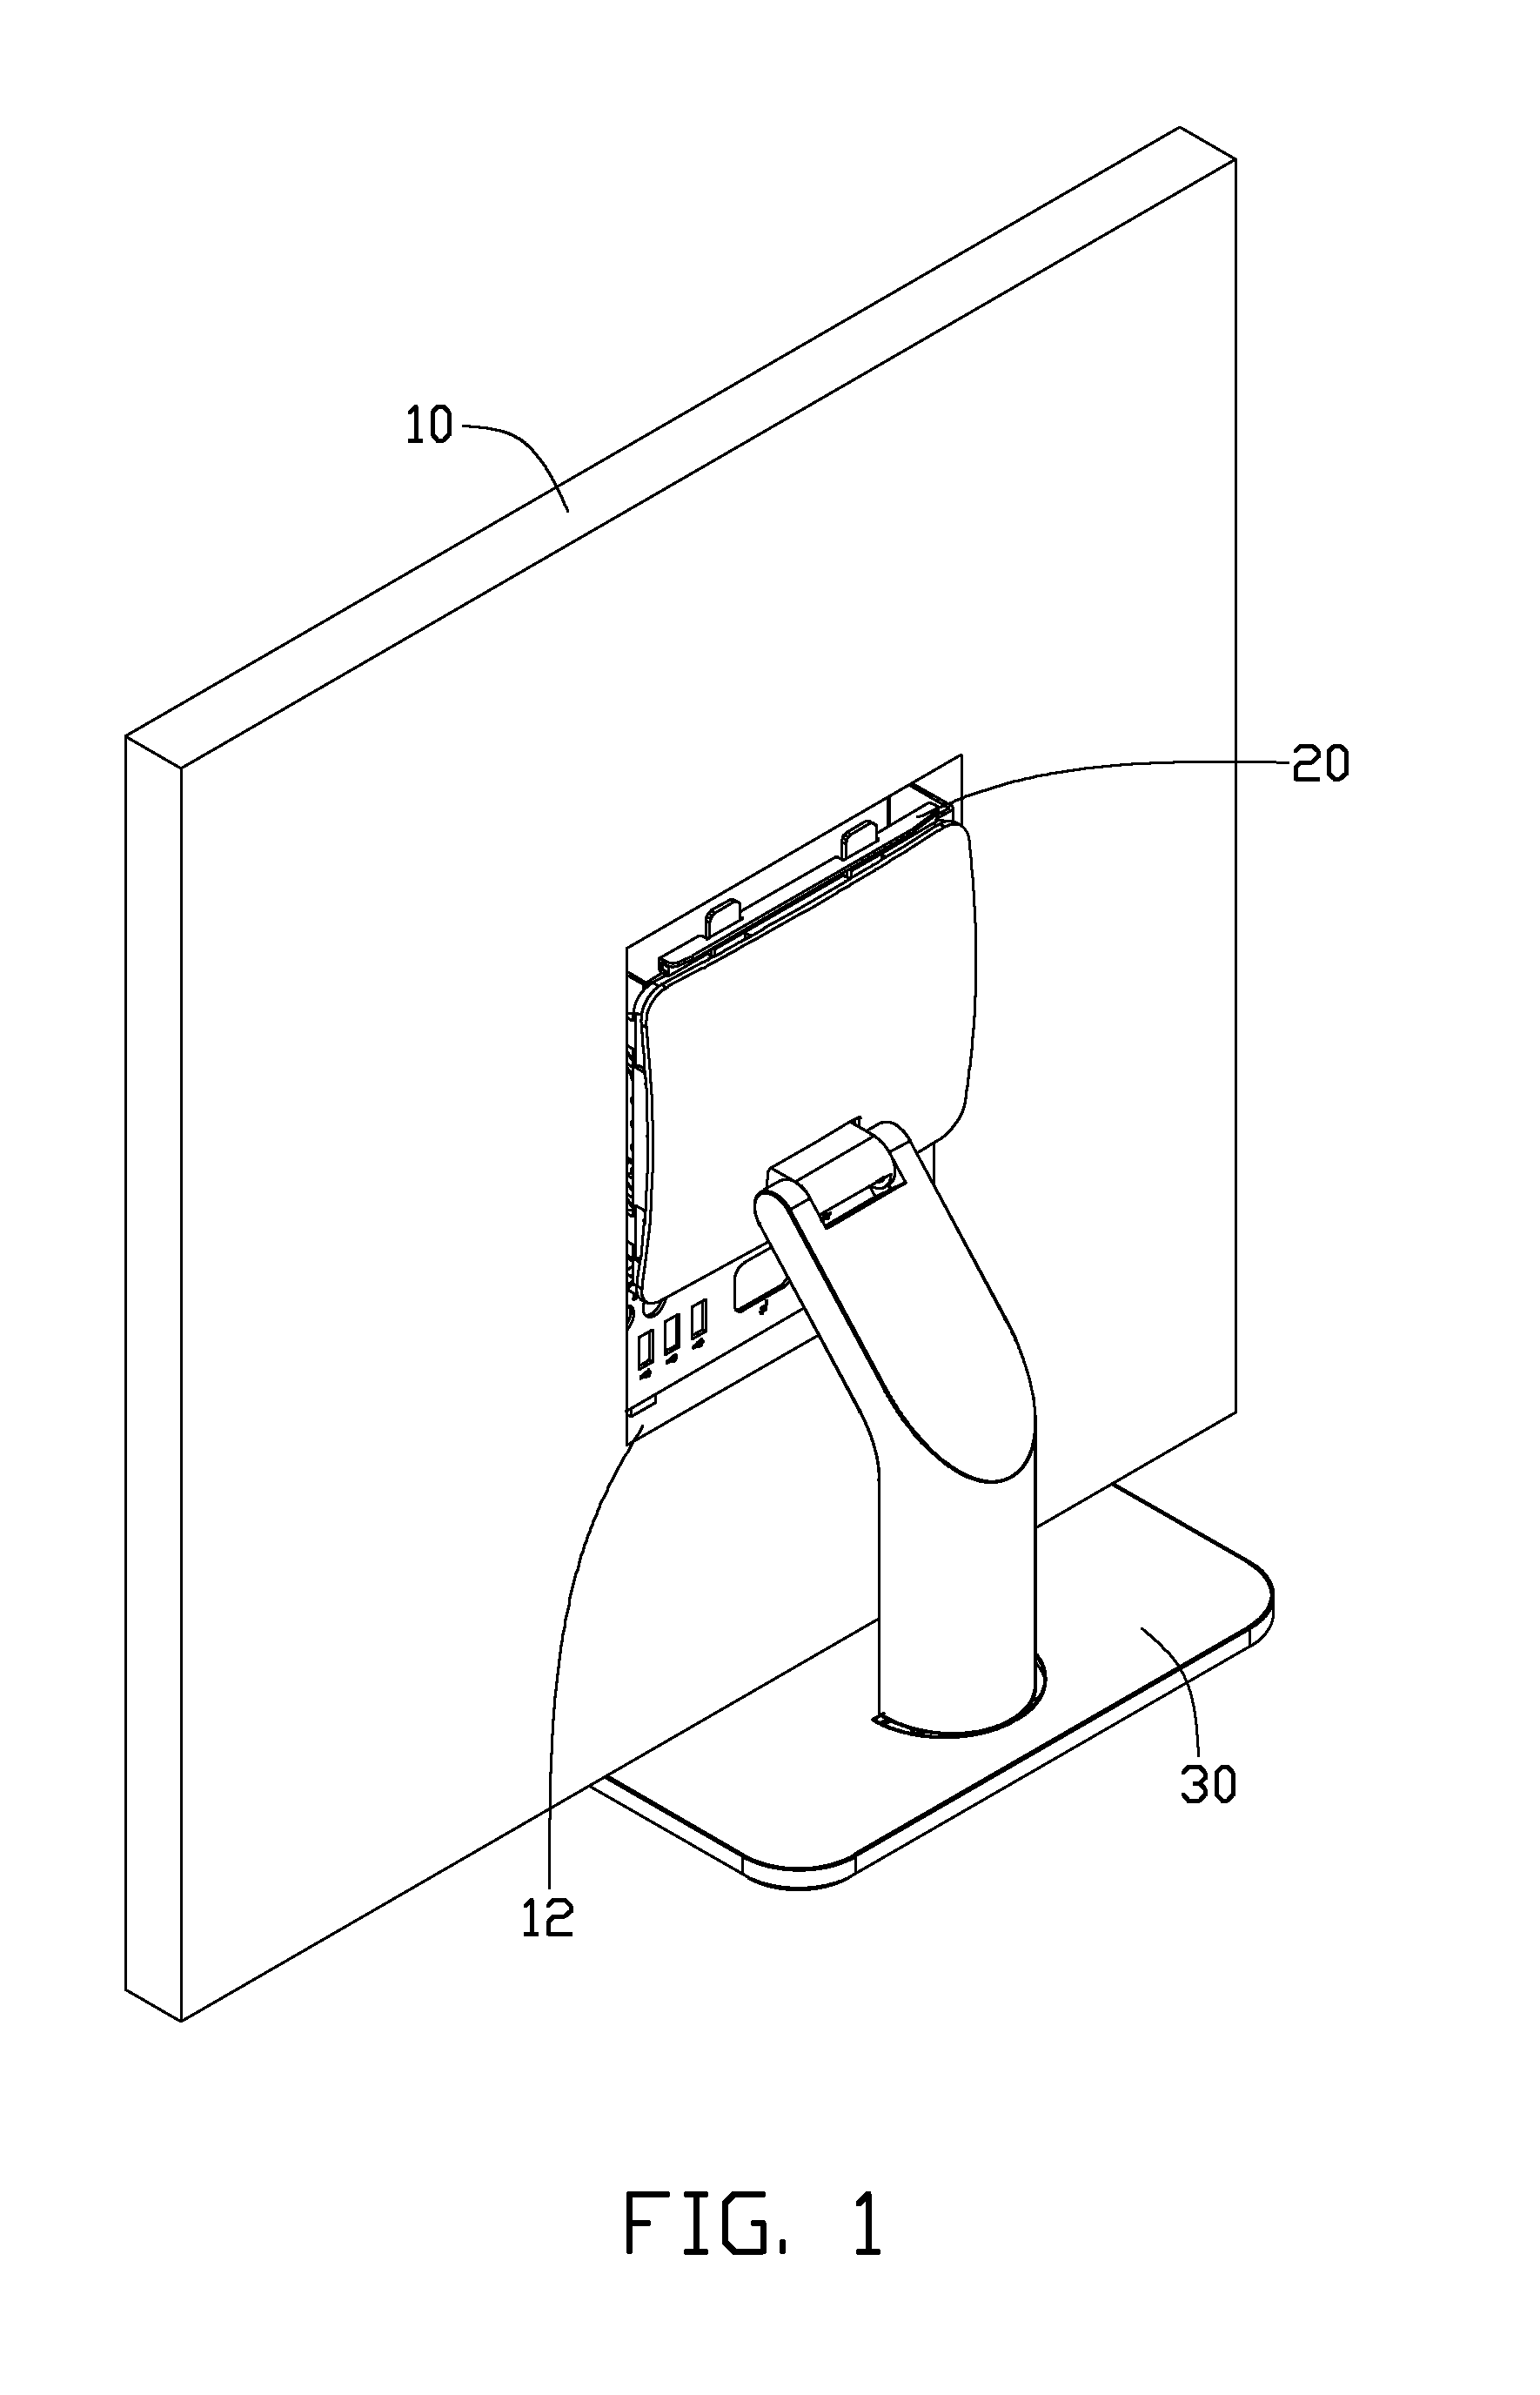 Supporting apparatus for electronic device